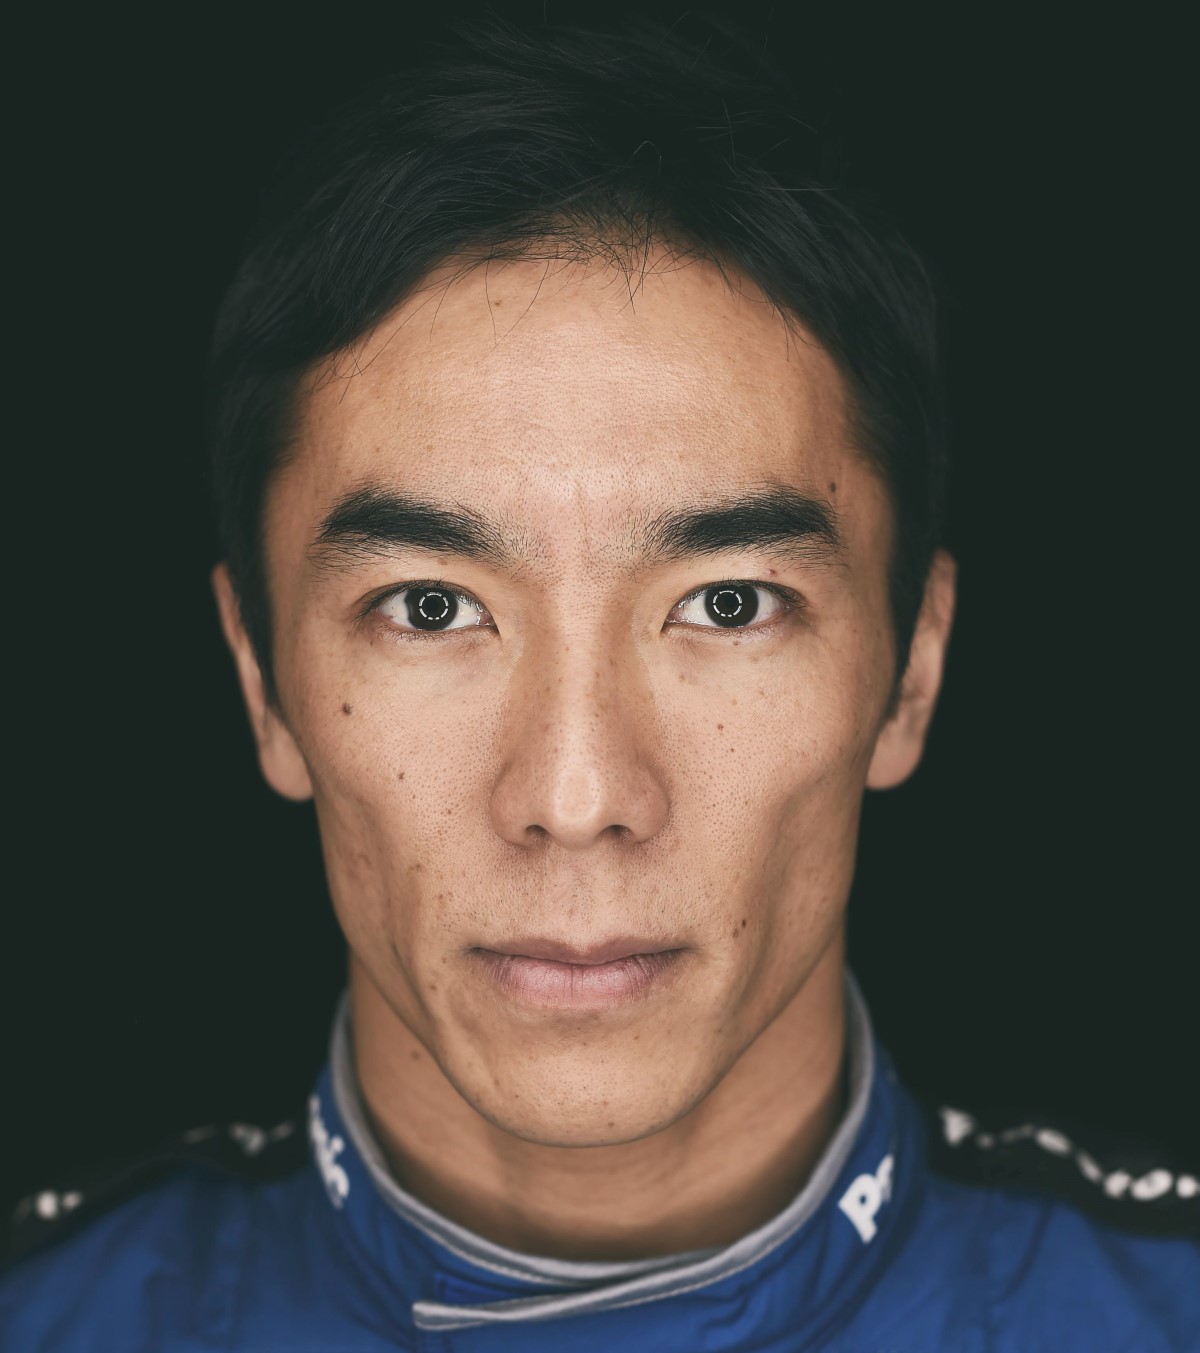 2017 Indy 500 winner Takuma Sato driving for the Rahal team this year